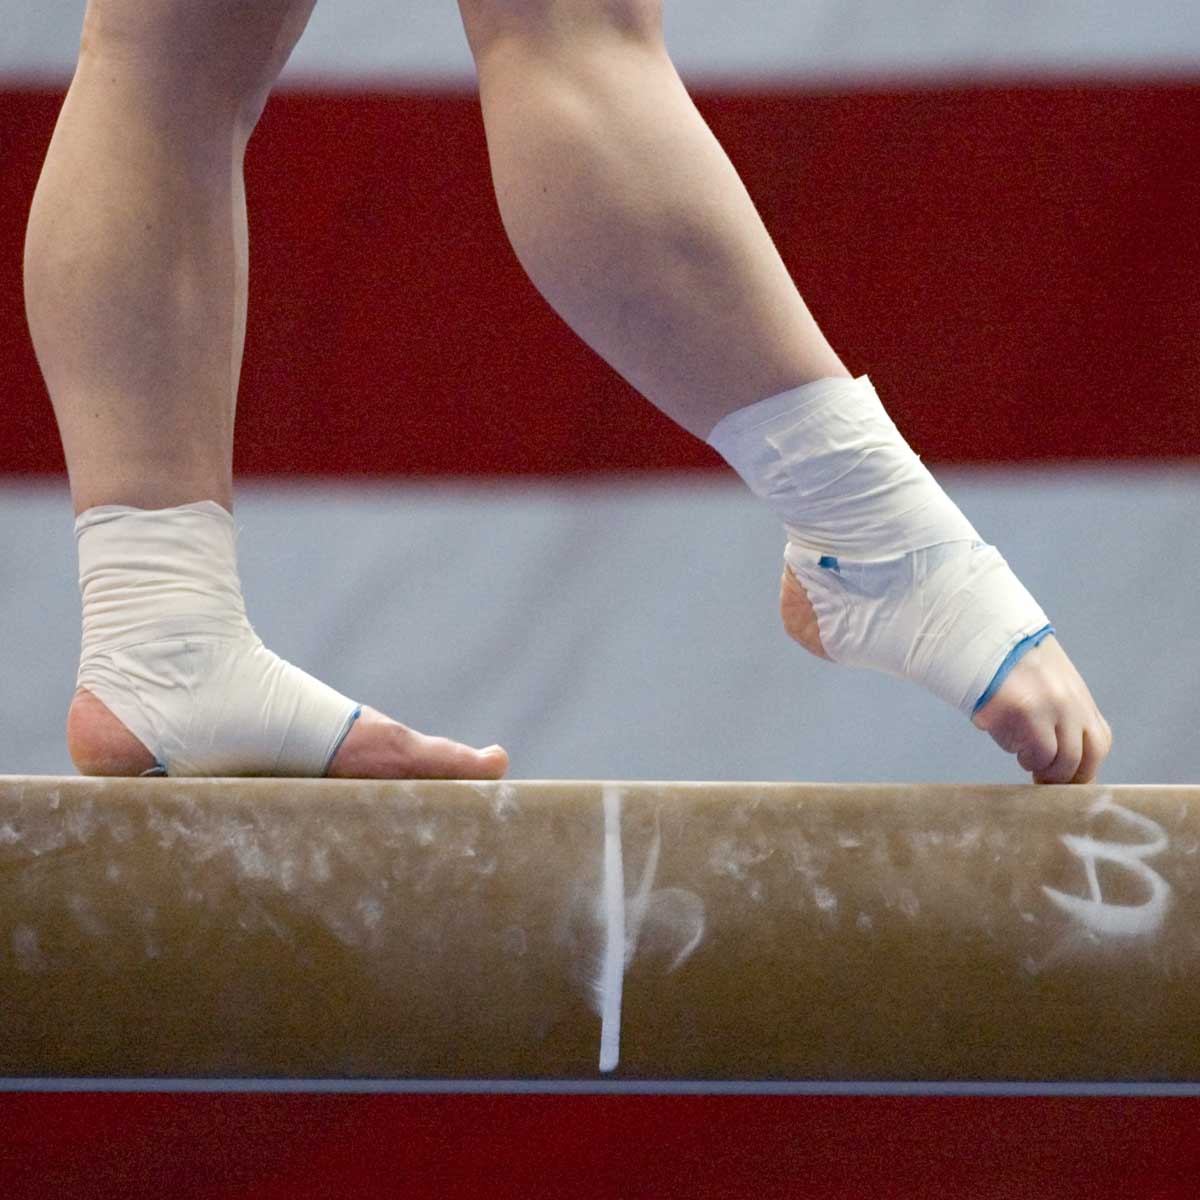 Closeup of a gymnast's feet with chalk and protective equipment in a gymnastics competition.